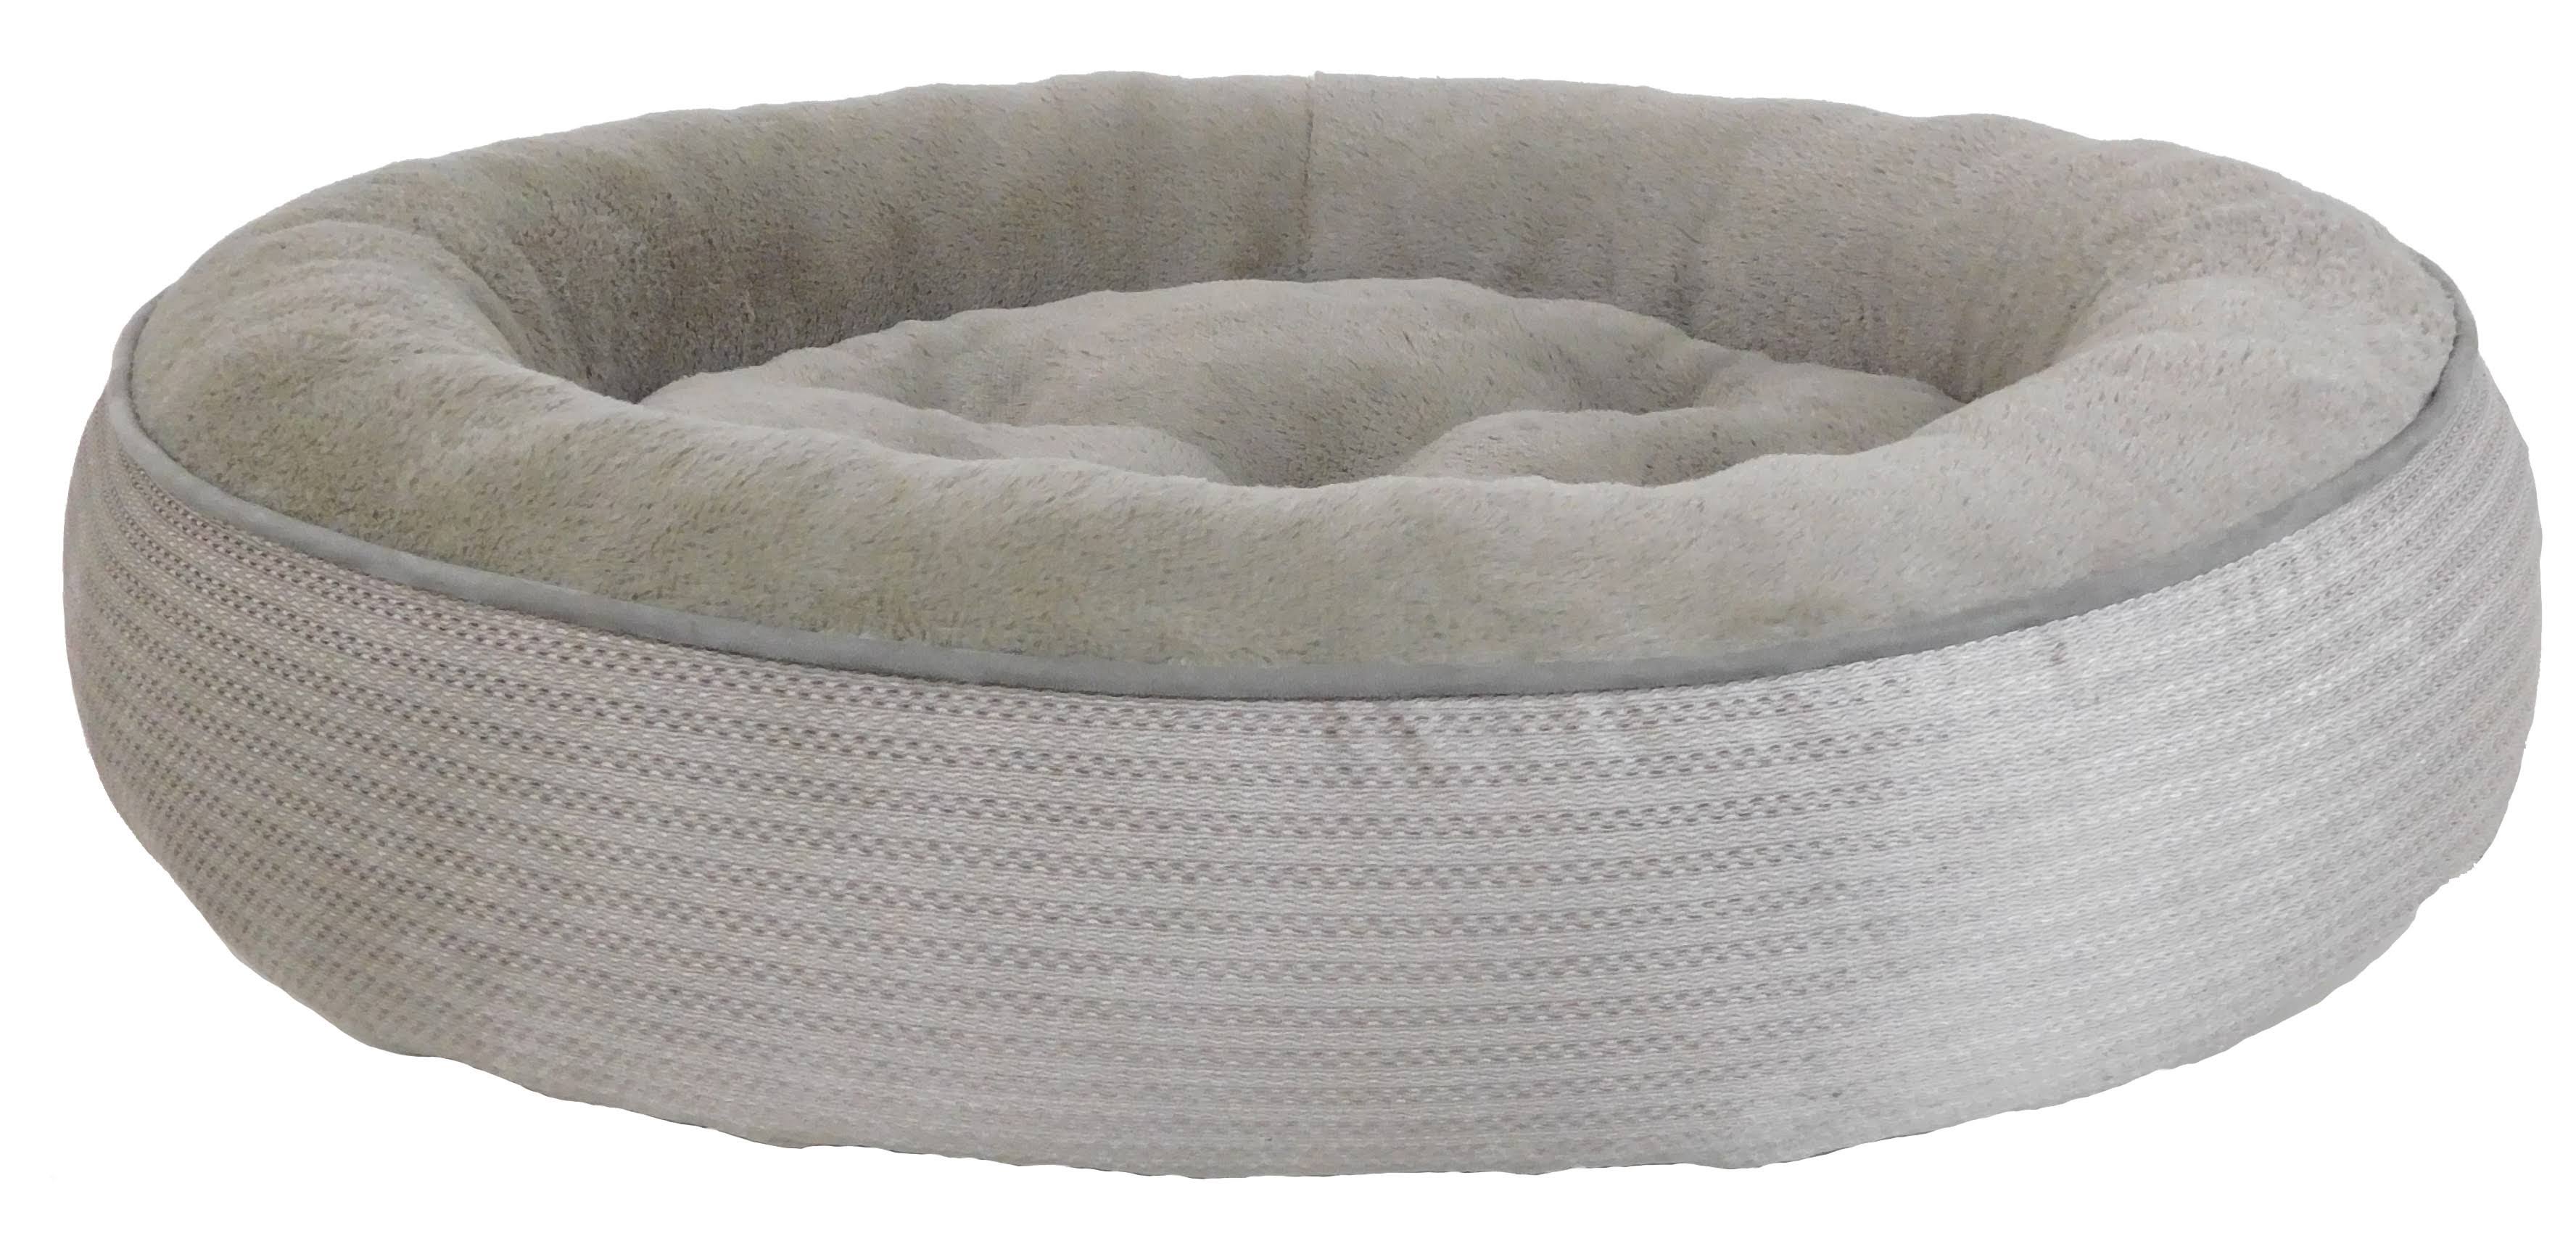 Arlee Pet Products Duncan Dunkin Dog Bed Gravel Grey 36X27X7 inch